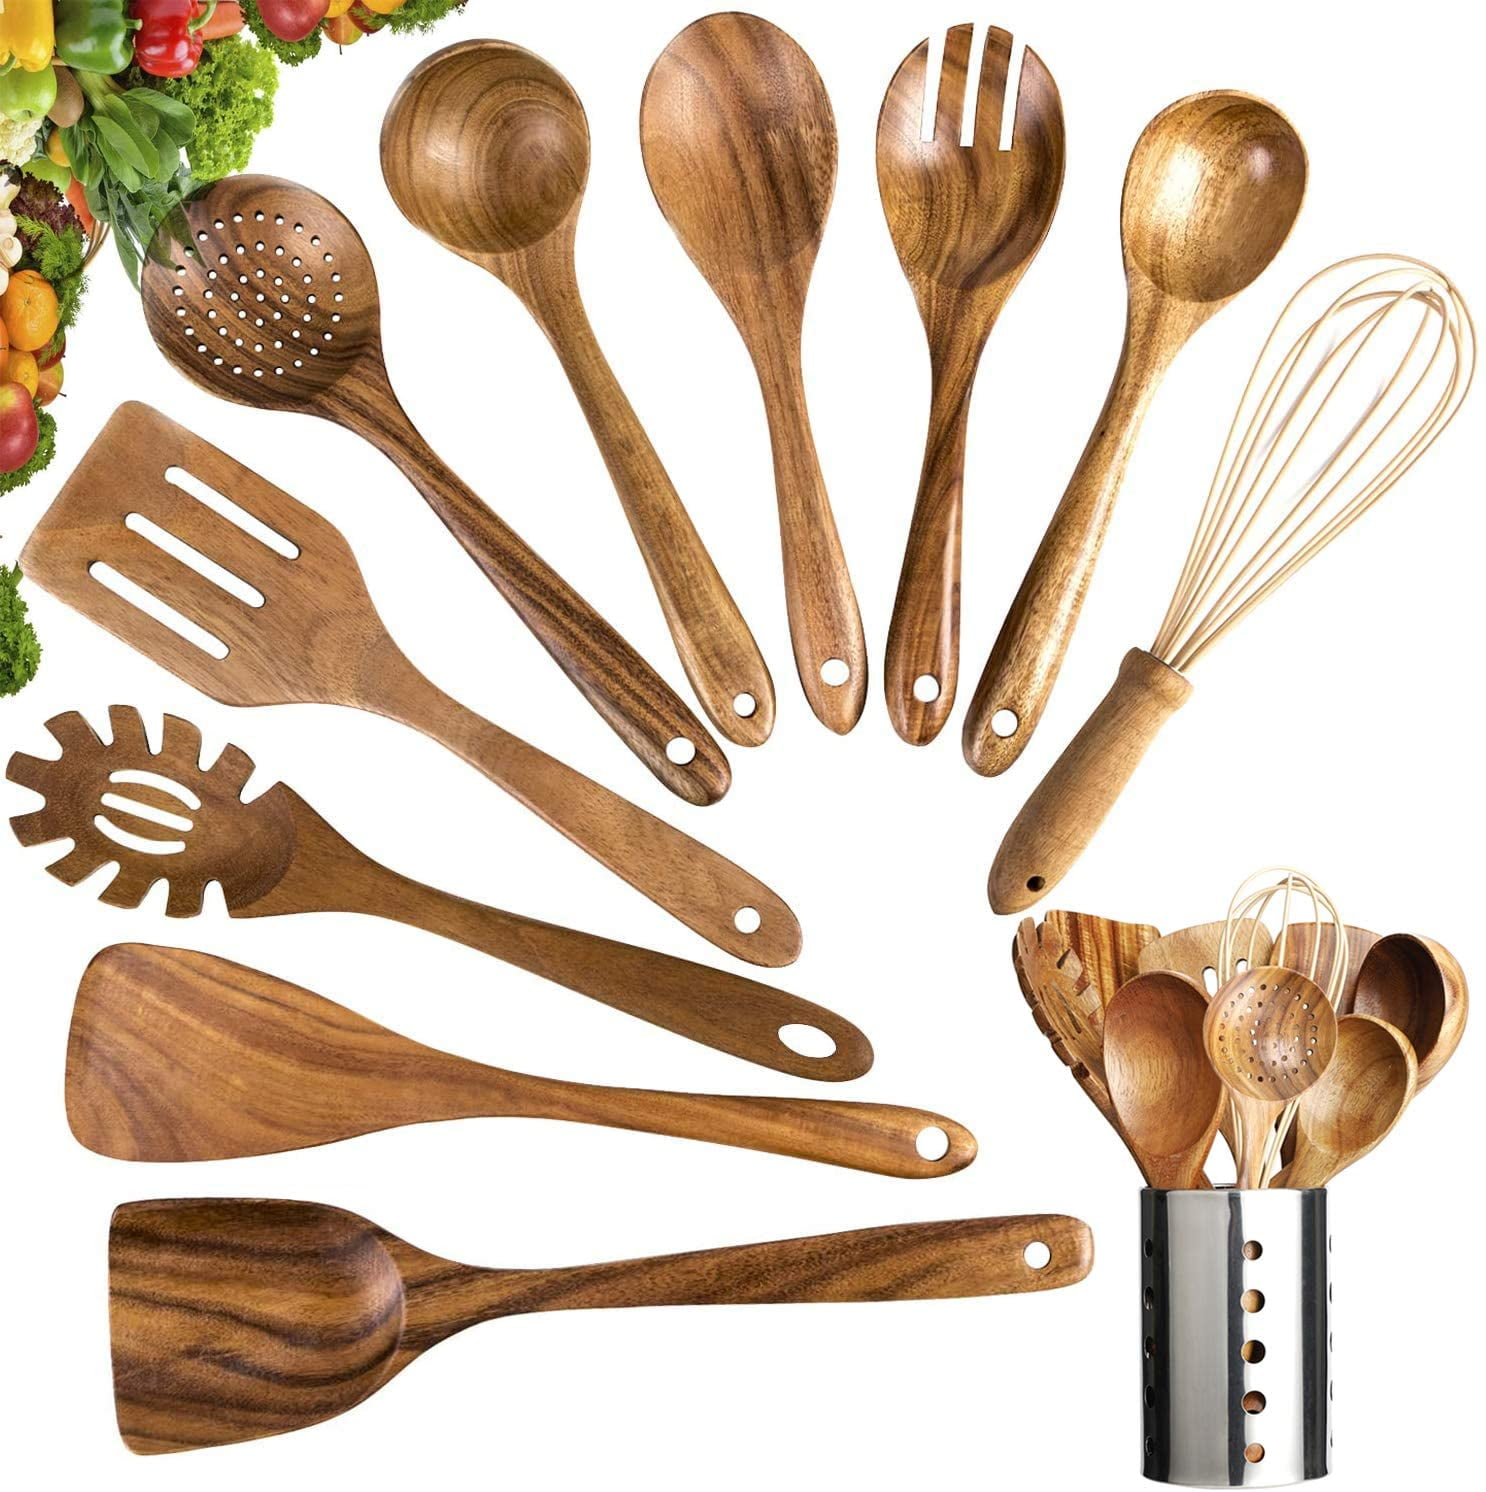 1Pcs Wooden Spoon Bamboo Kitchen Utensil Tool Soup Catering.-Kit Teaspoon D2H6